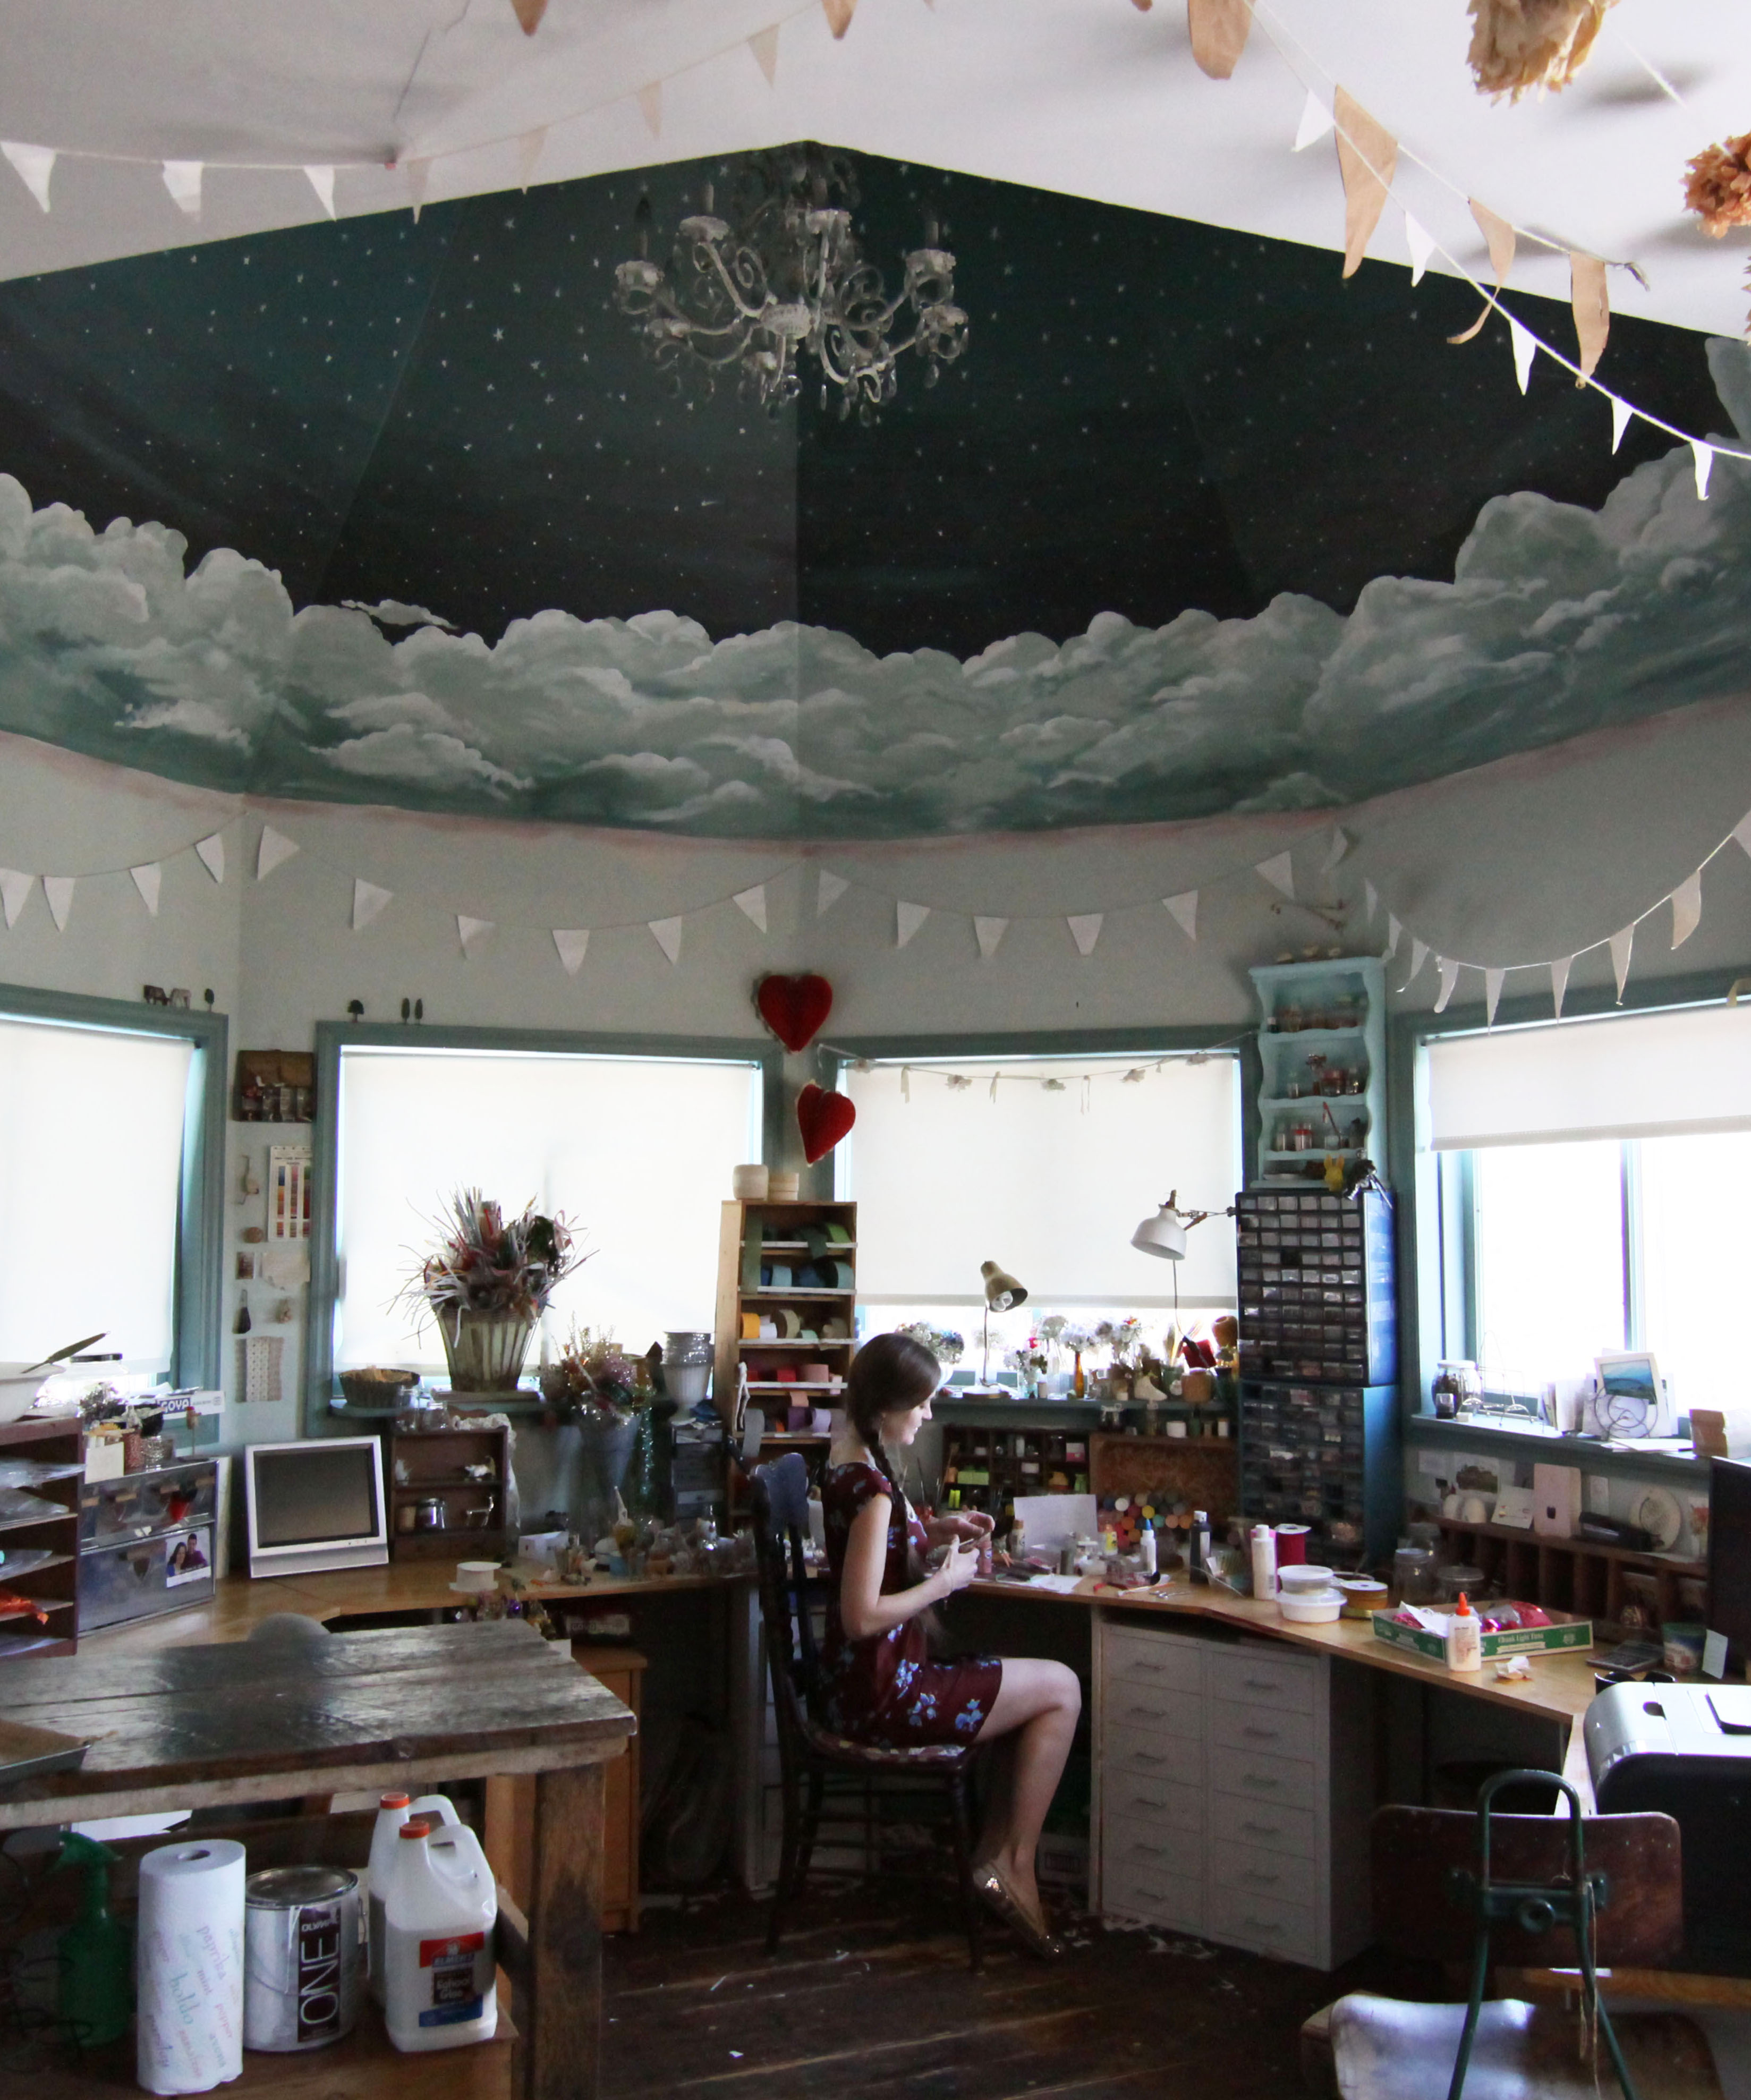 The dome ceiling is painted as a starry night sky in Crystal Sloan's studio space. 